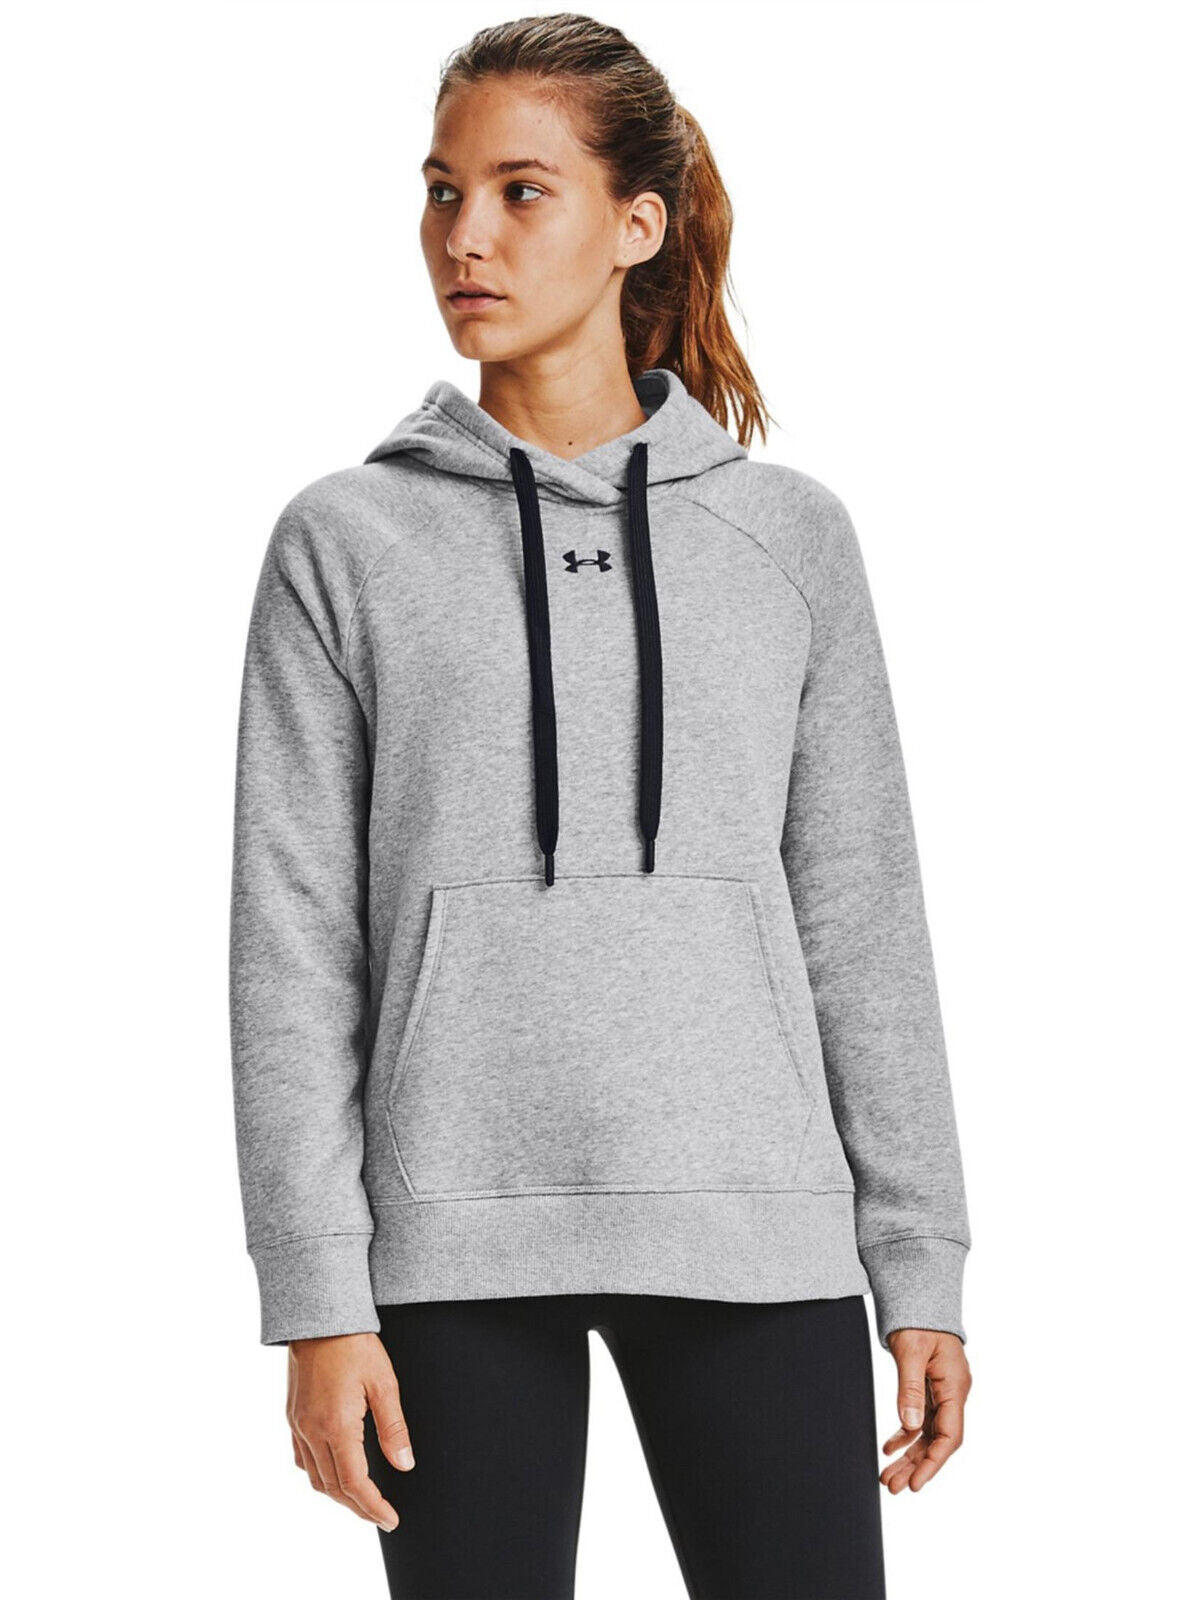 UNDER ARMOUR Rival Fleece Grey/Black HB Hoodie Size Large ** V347